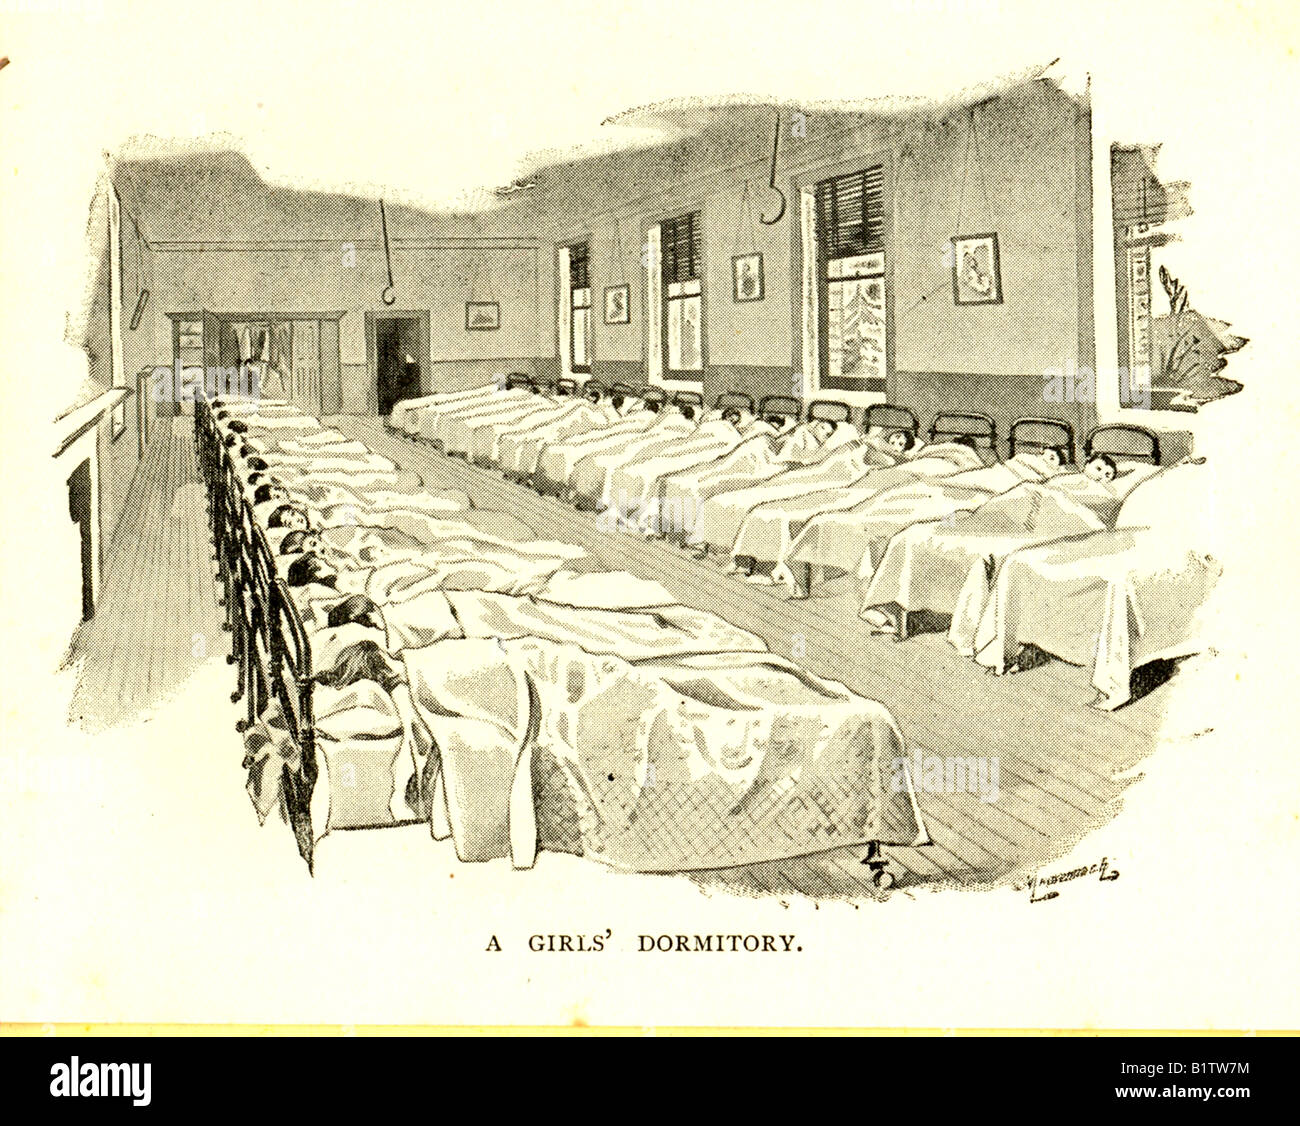 Girls' Dormitory at Reedham Orphanage, Purley, Surrey 1895 Stock Photo